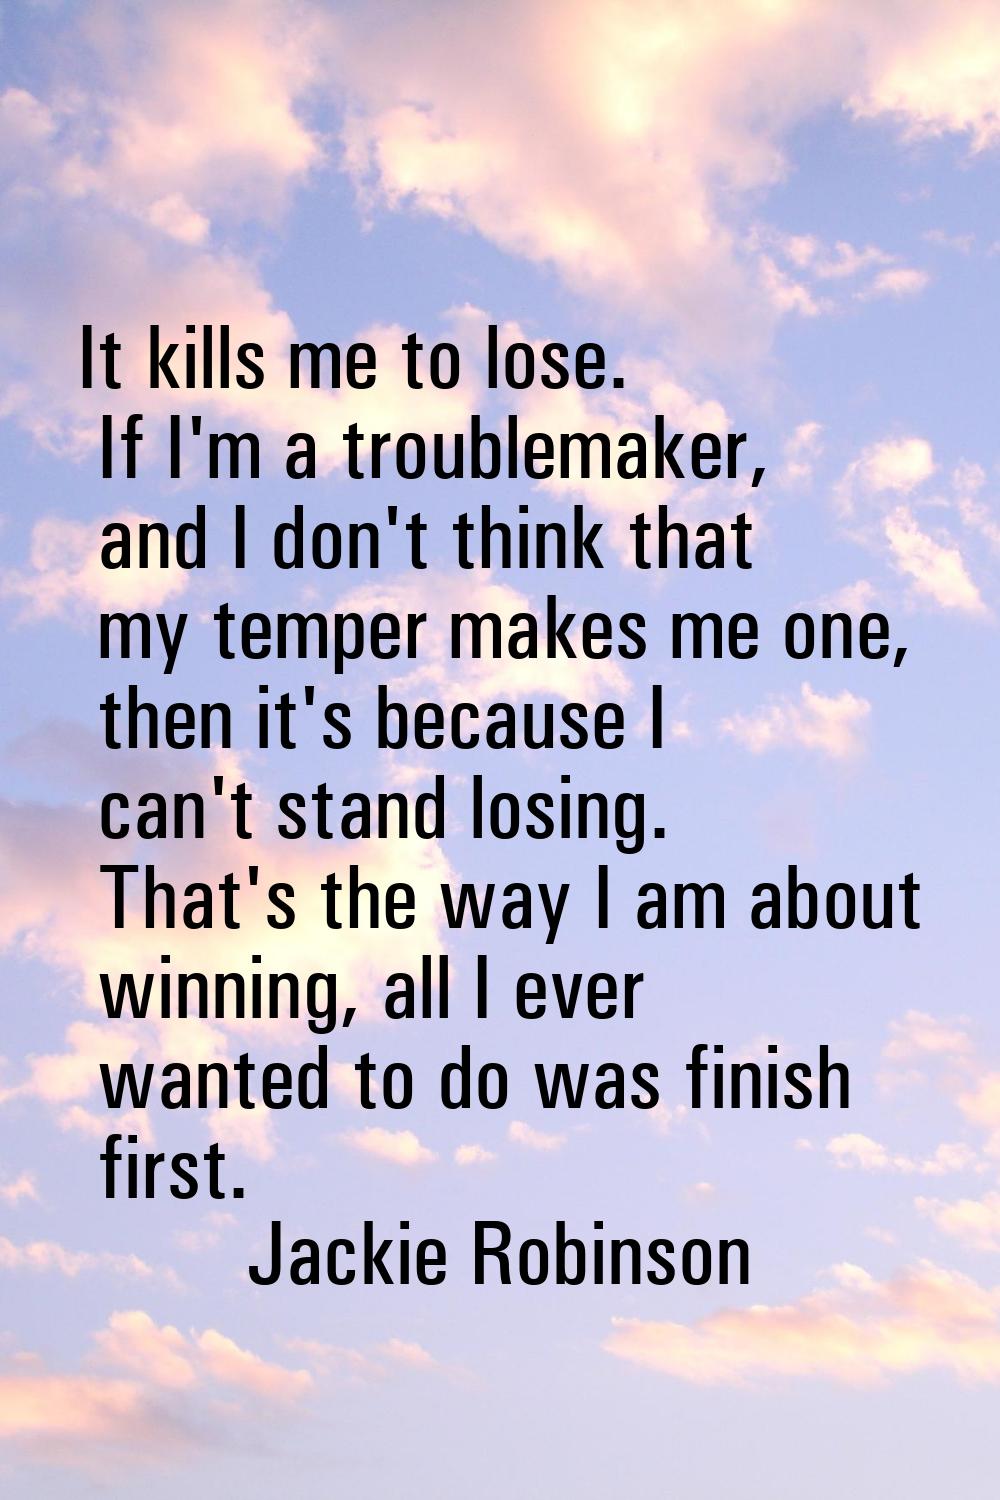 It kills me to lose. If I'm a troublemaker, and I don't think that my temper makes me one, then it'